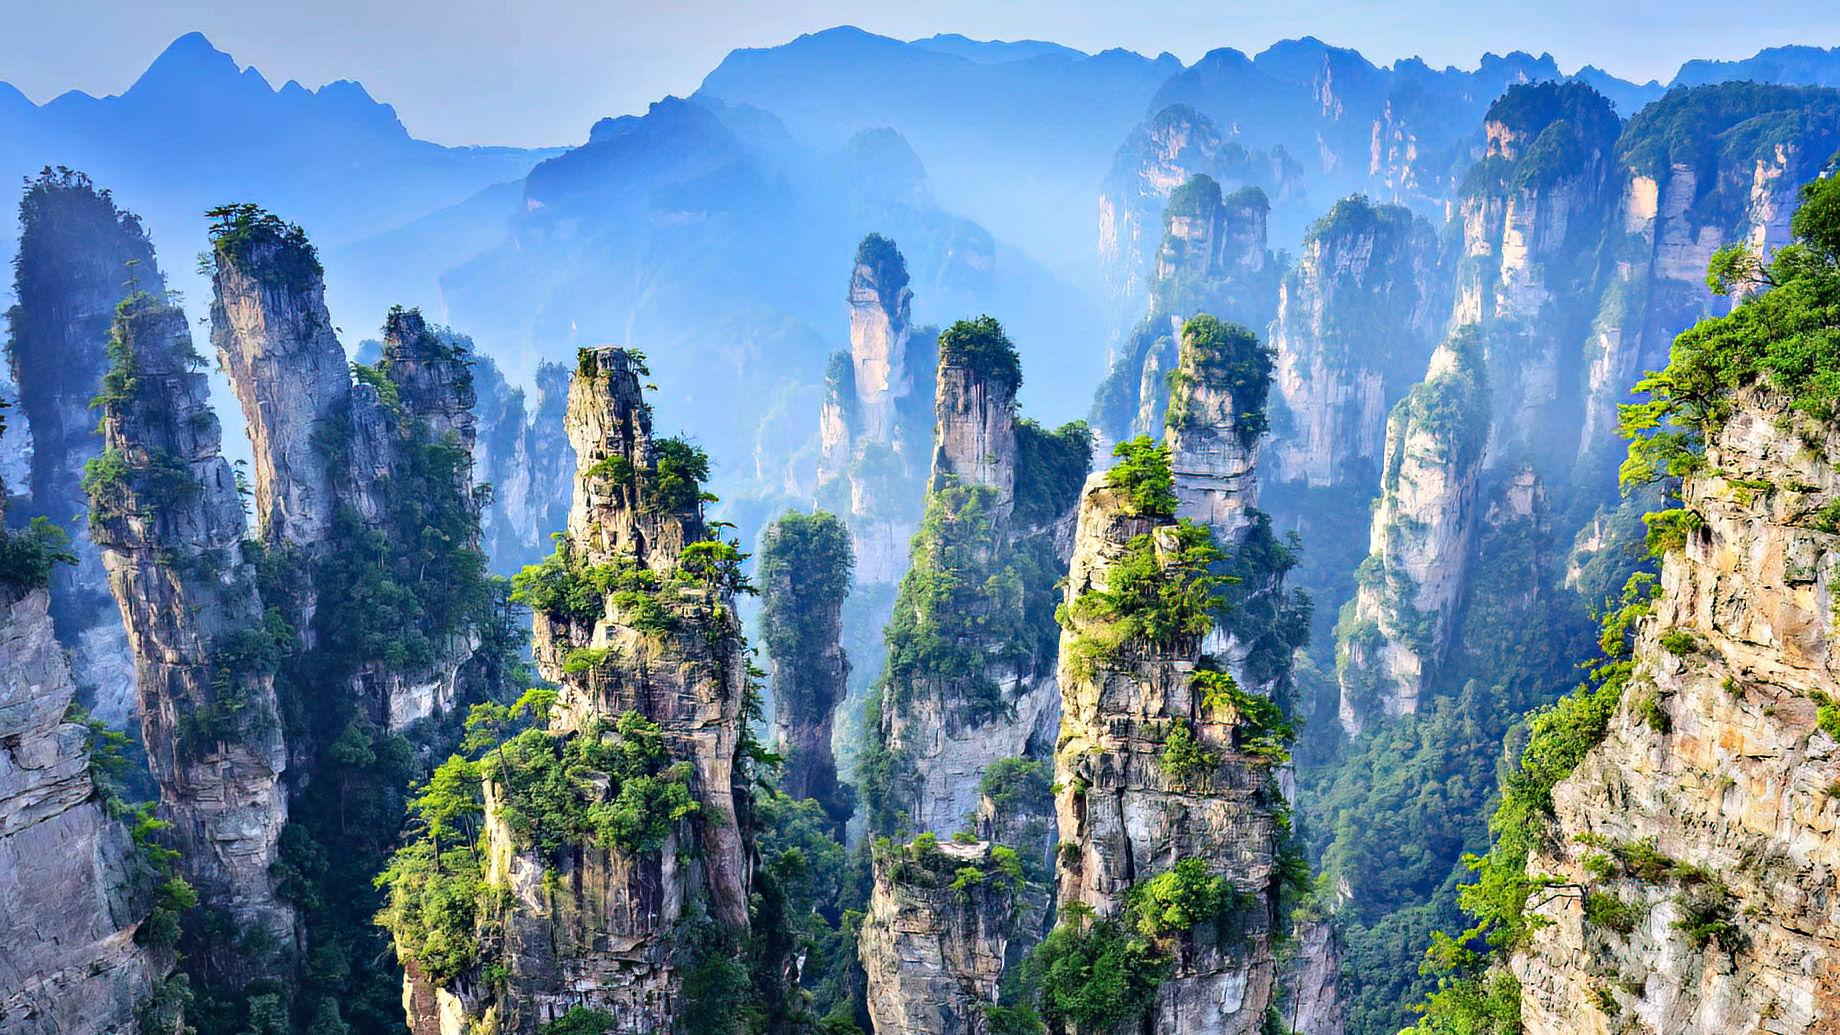 The Fantastical Zhangjiajie National Forest Park In Hunan Province, China